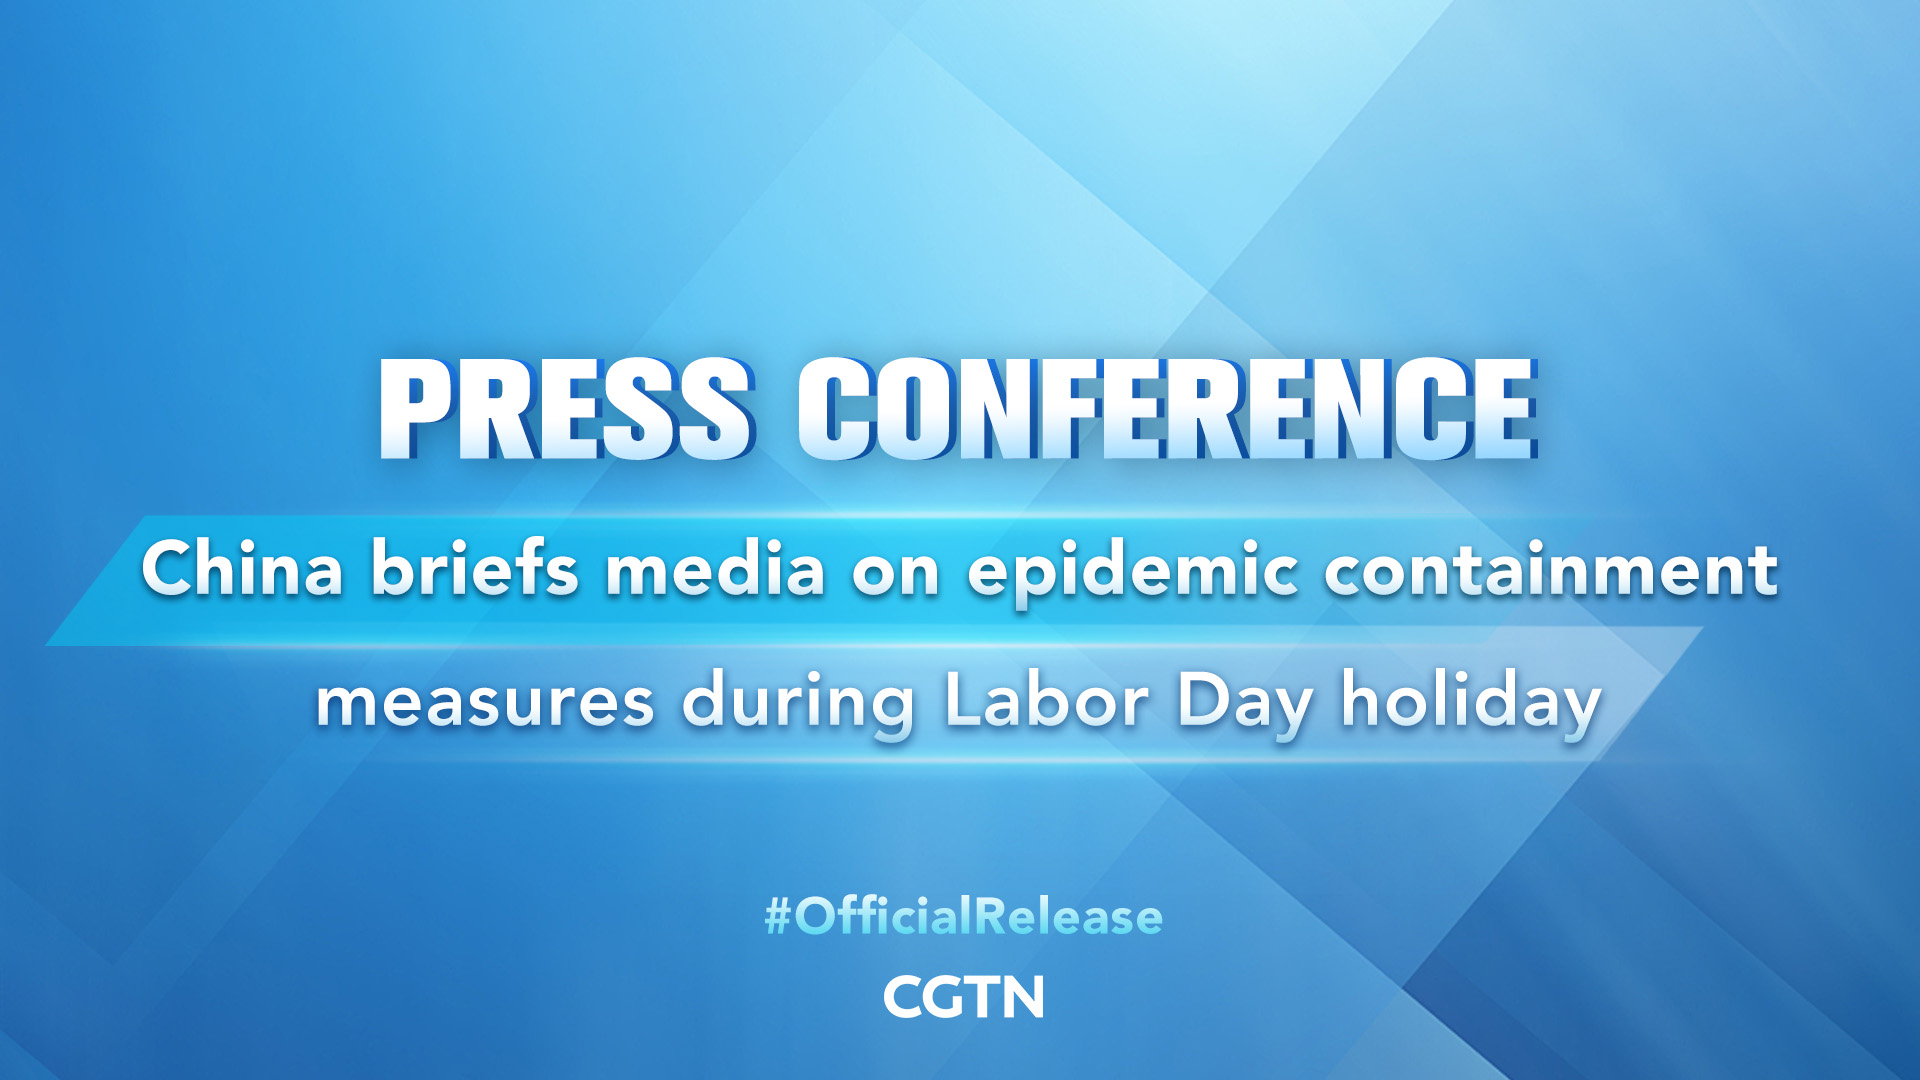 Live: China briefs media on epidemic containment measures during Labor Day holiday